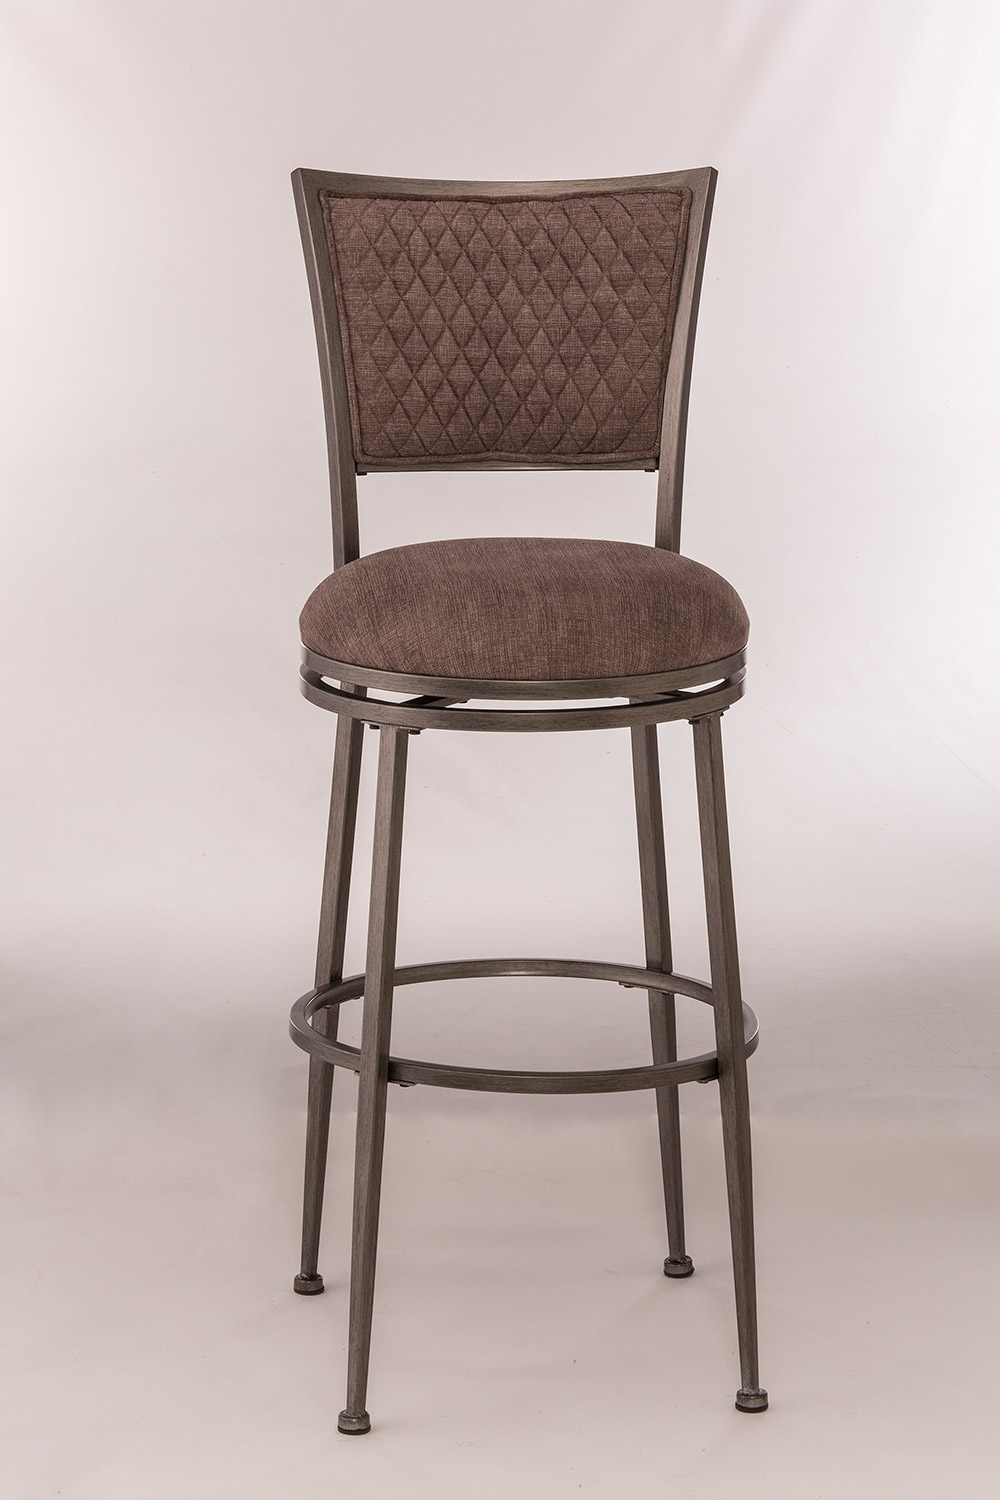 Hillsdale Burke Swivel Counter Stool - Distressed Pewter